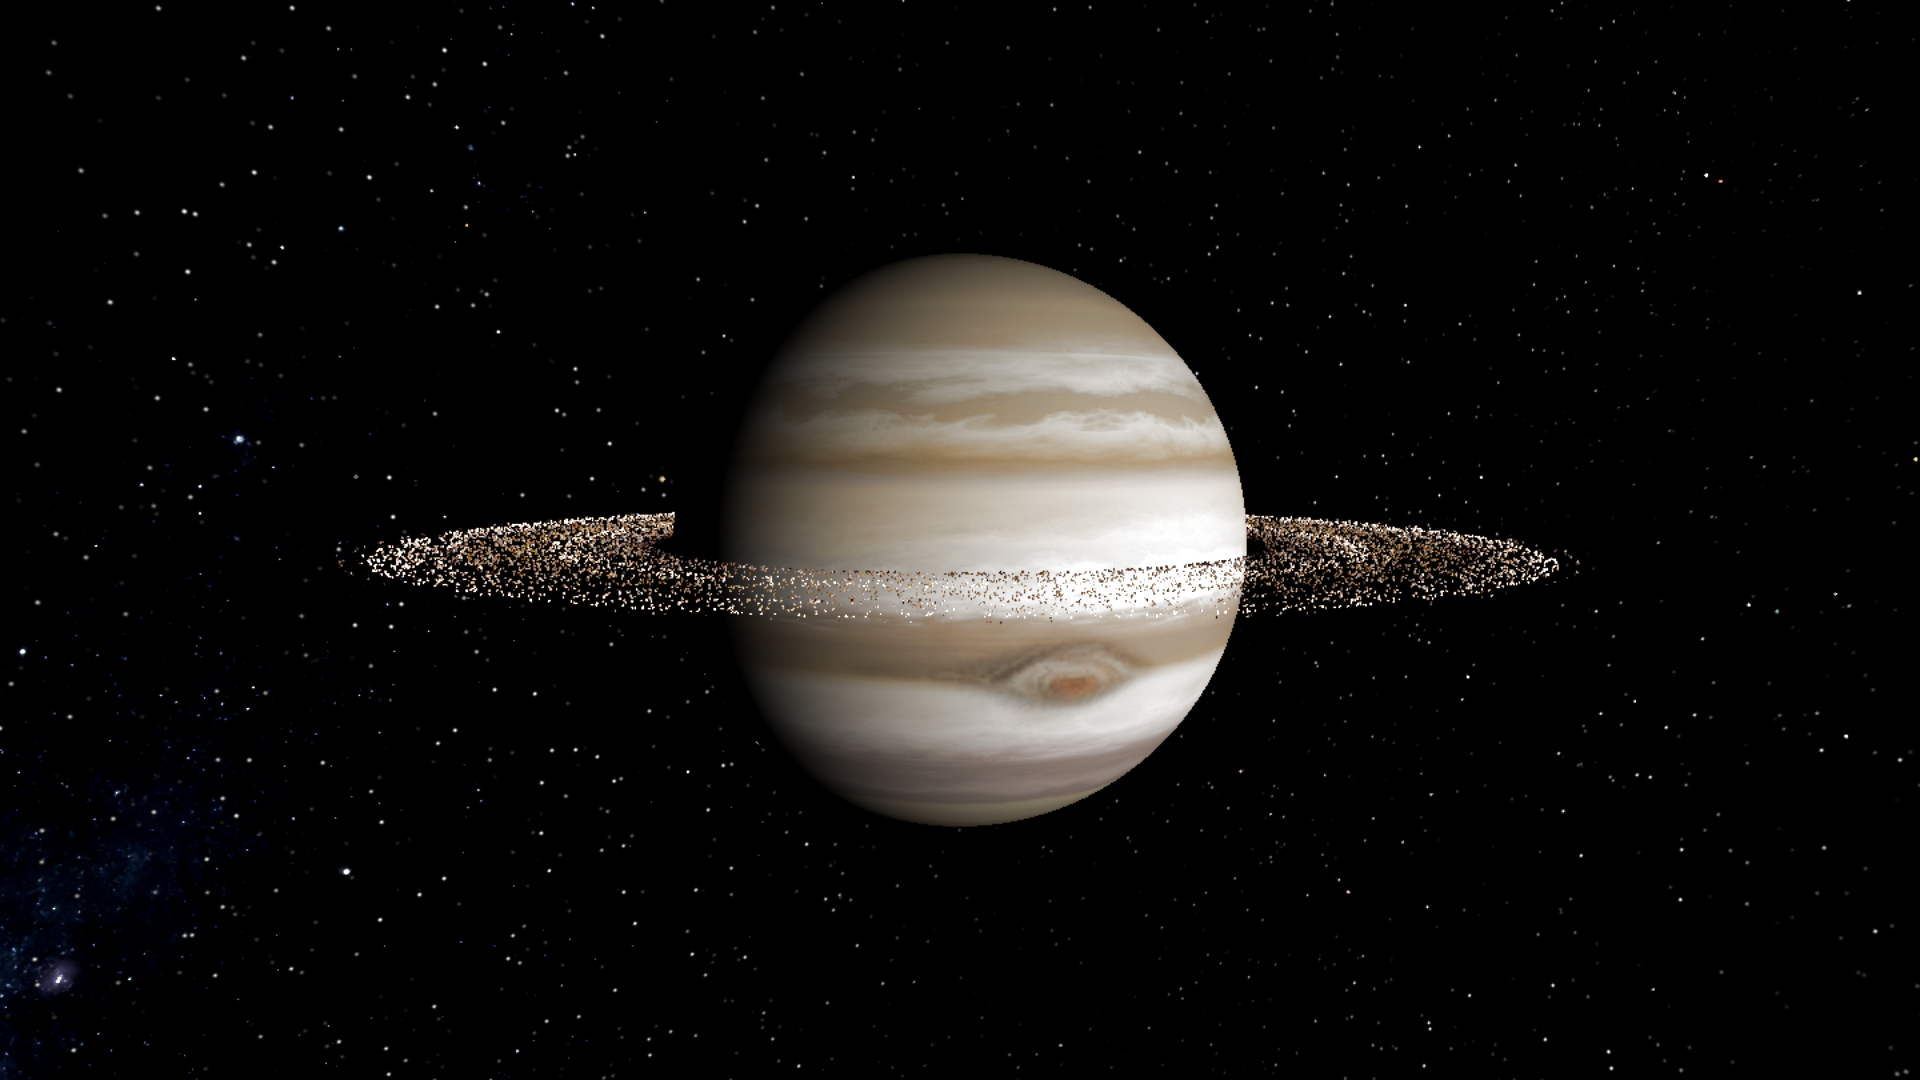 Why doesn't Jupiter have big, beautiful rings like Saturn?